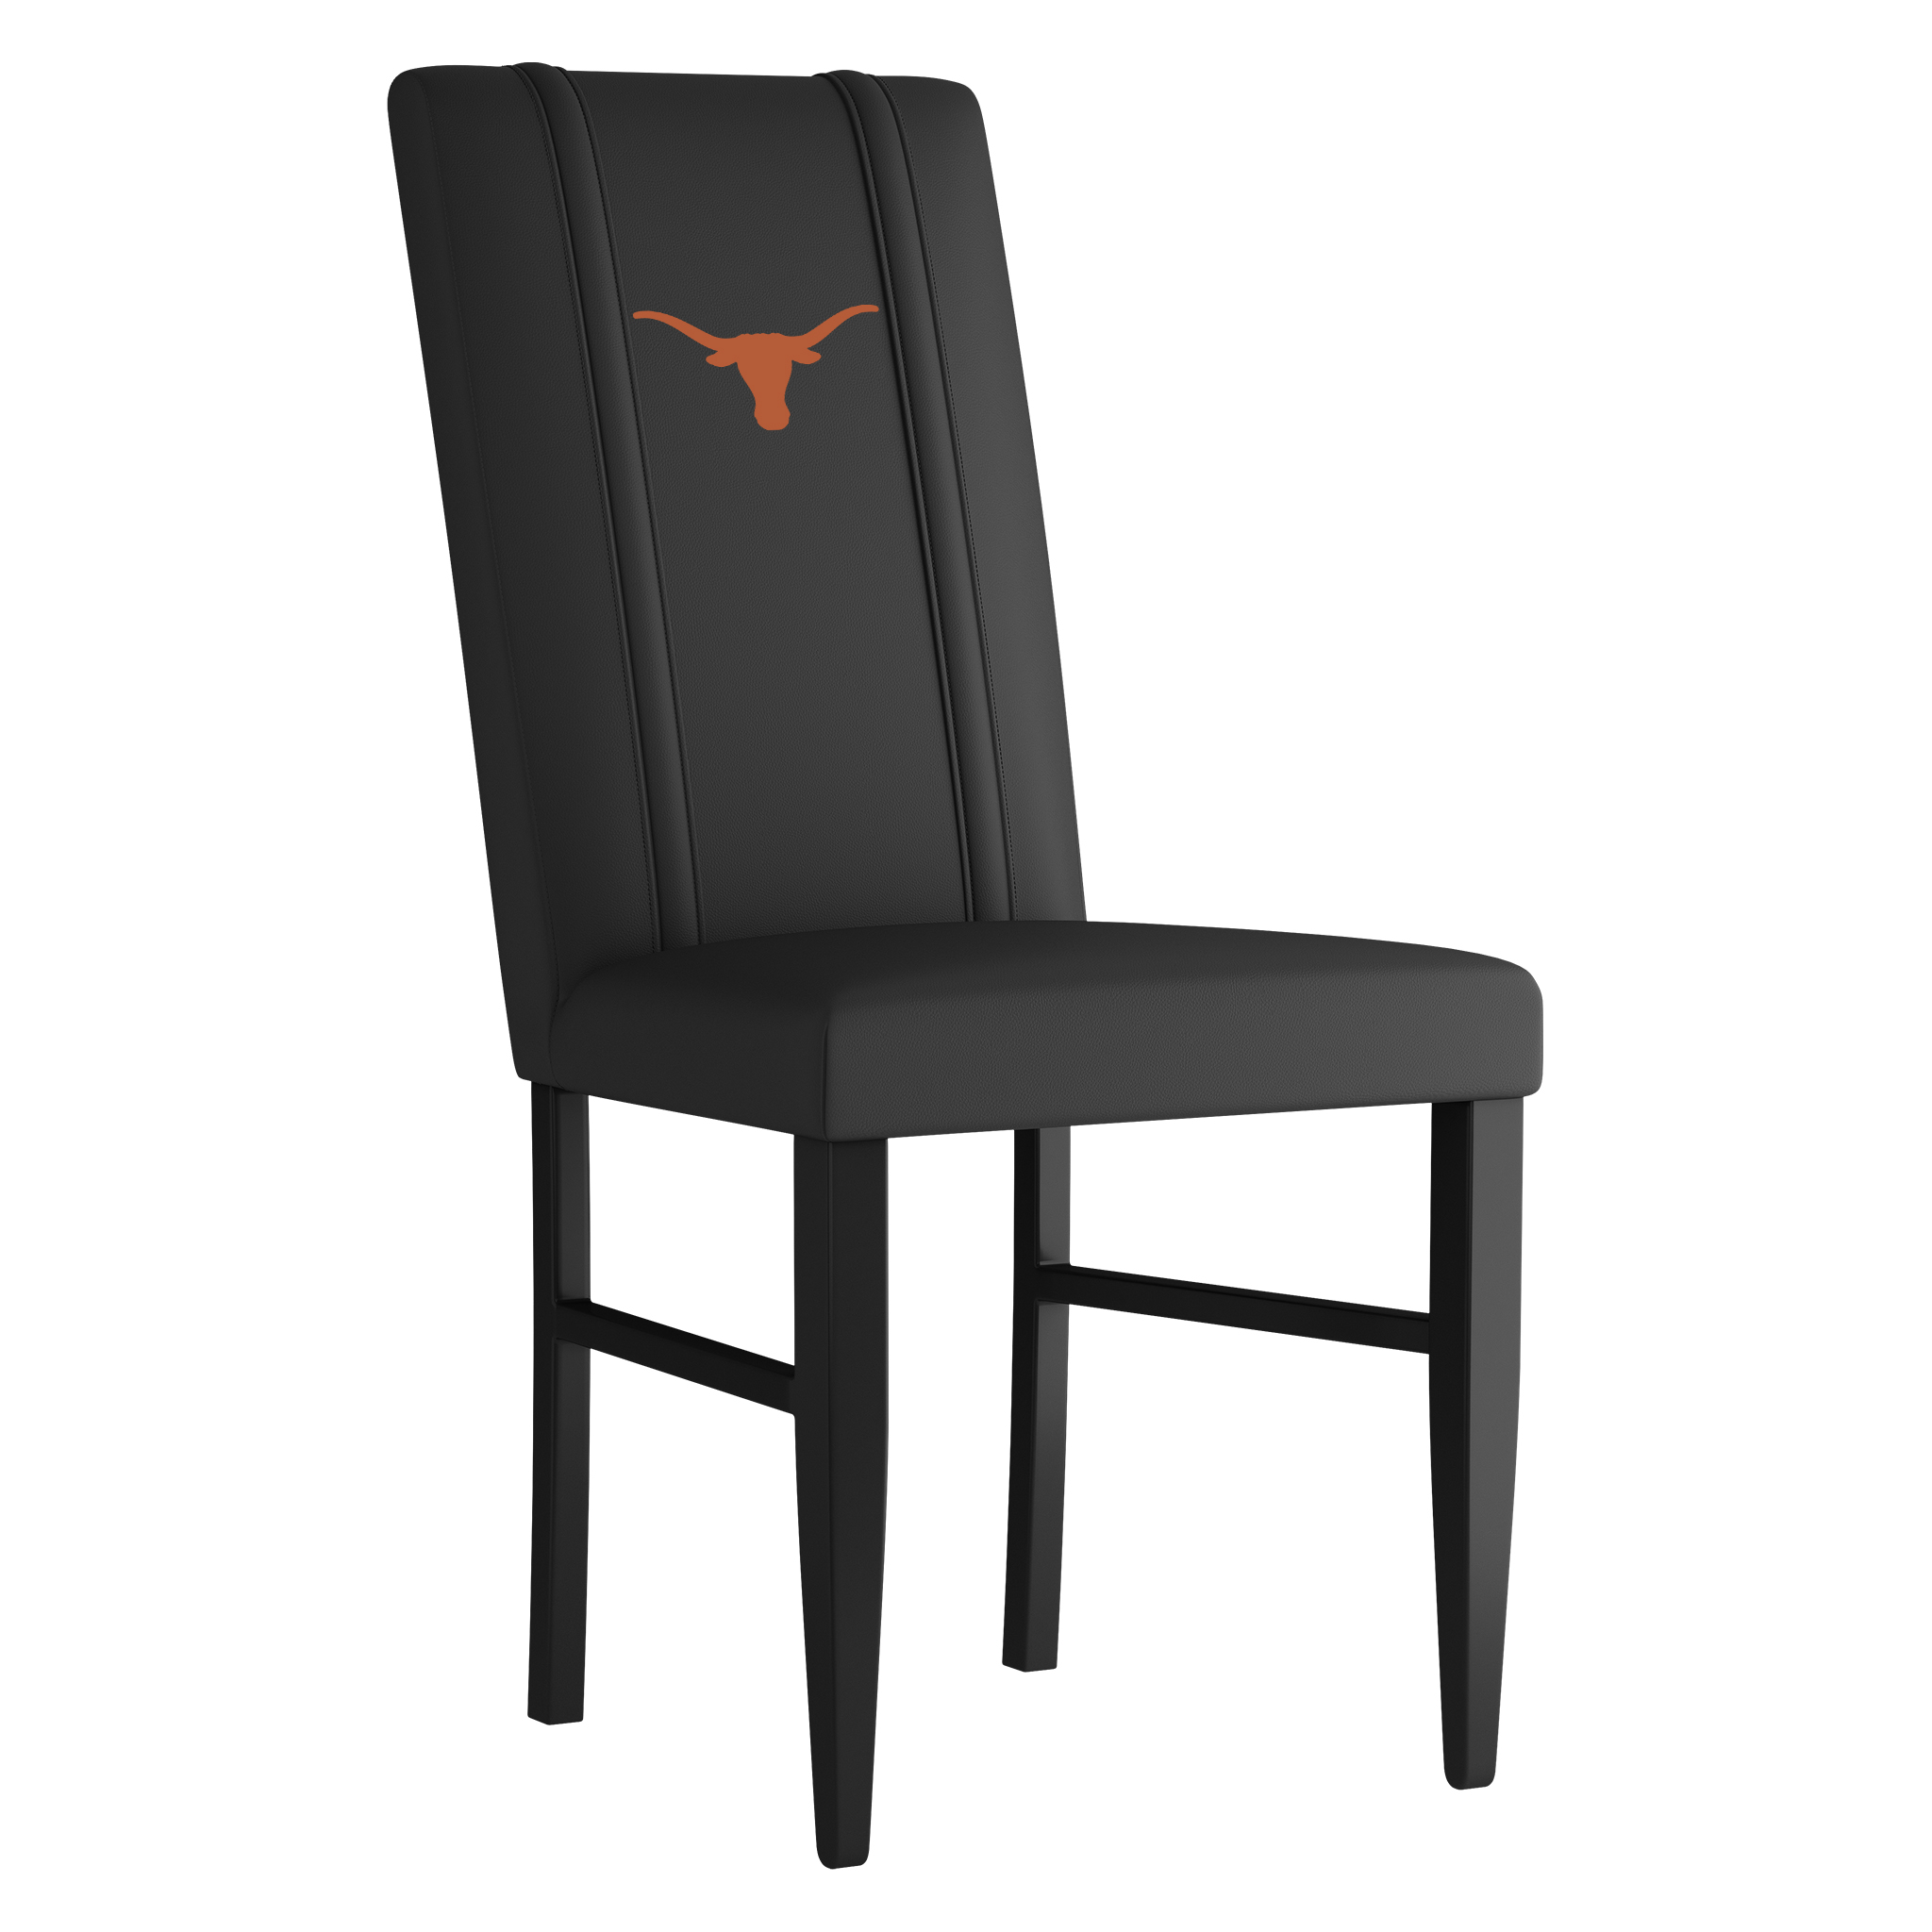 Texas Longhorns Side Chair 2000 With Texas Longhorns Primary